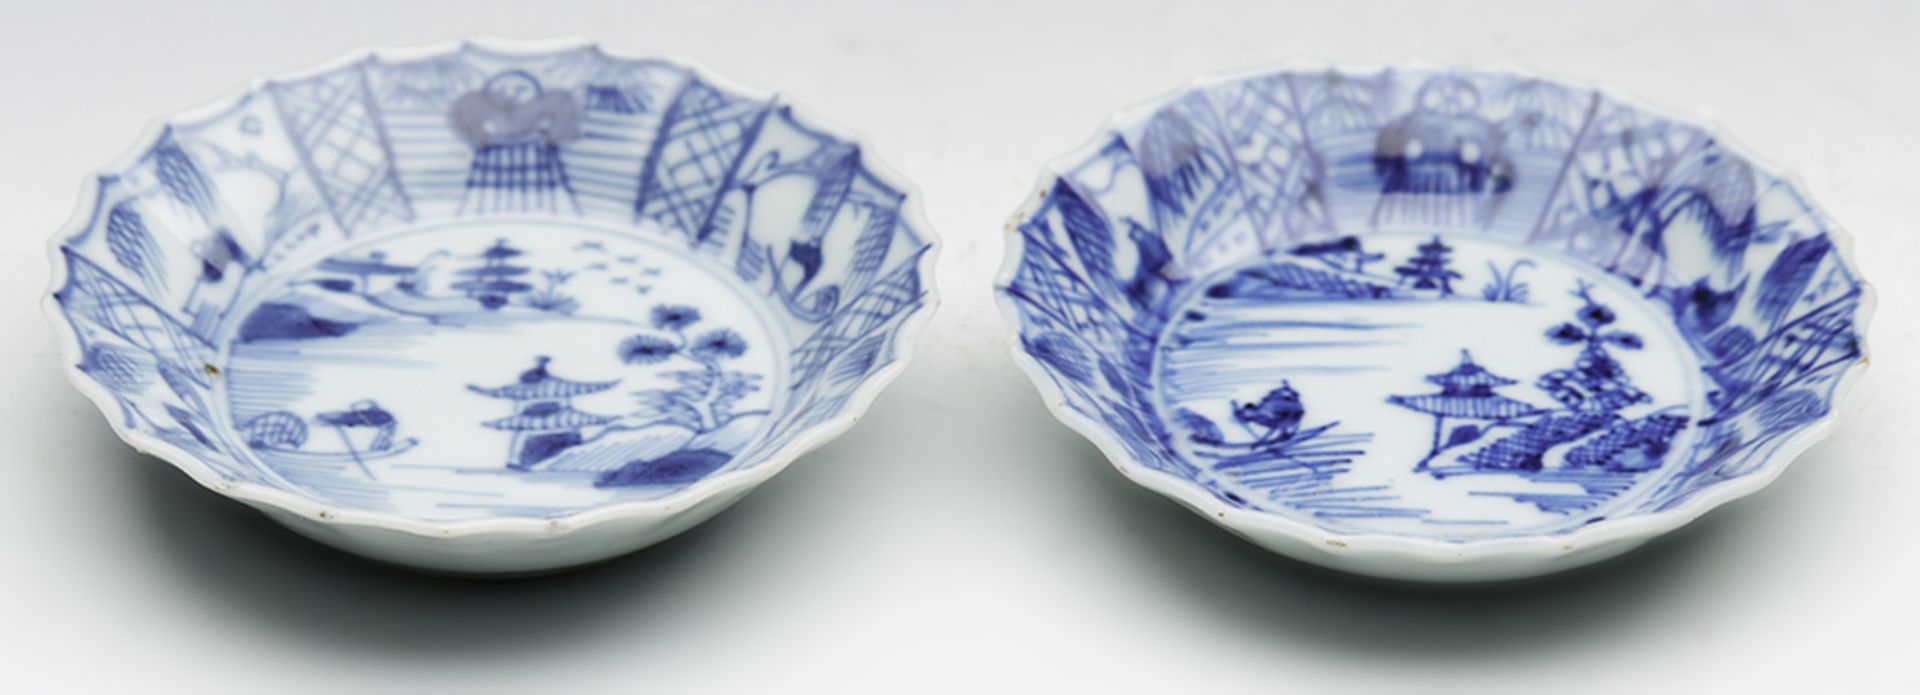 Pair Antique Chinese Qianlong Pickle Dishes With Watery Landscapes 18Th C. - Image 8 of 8